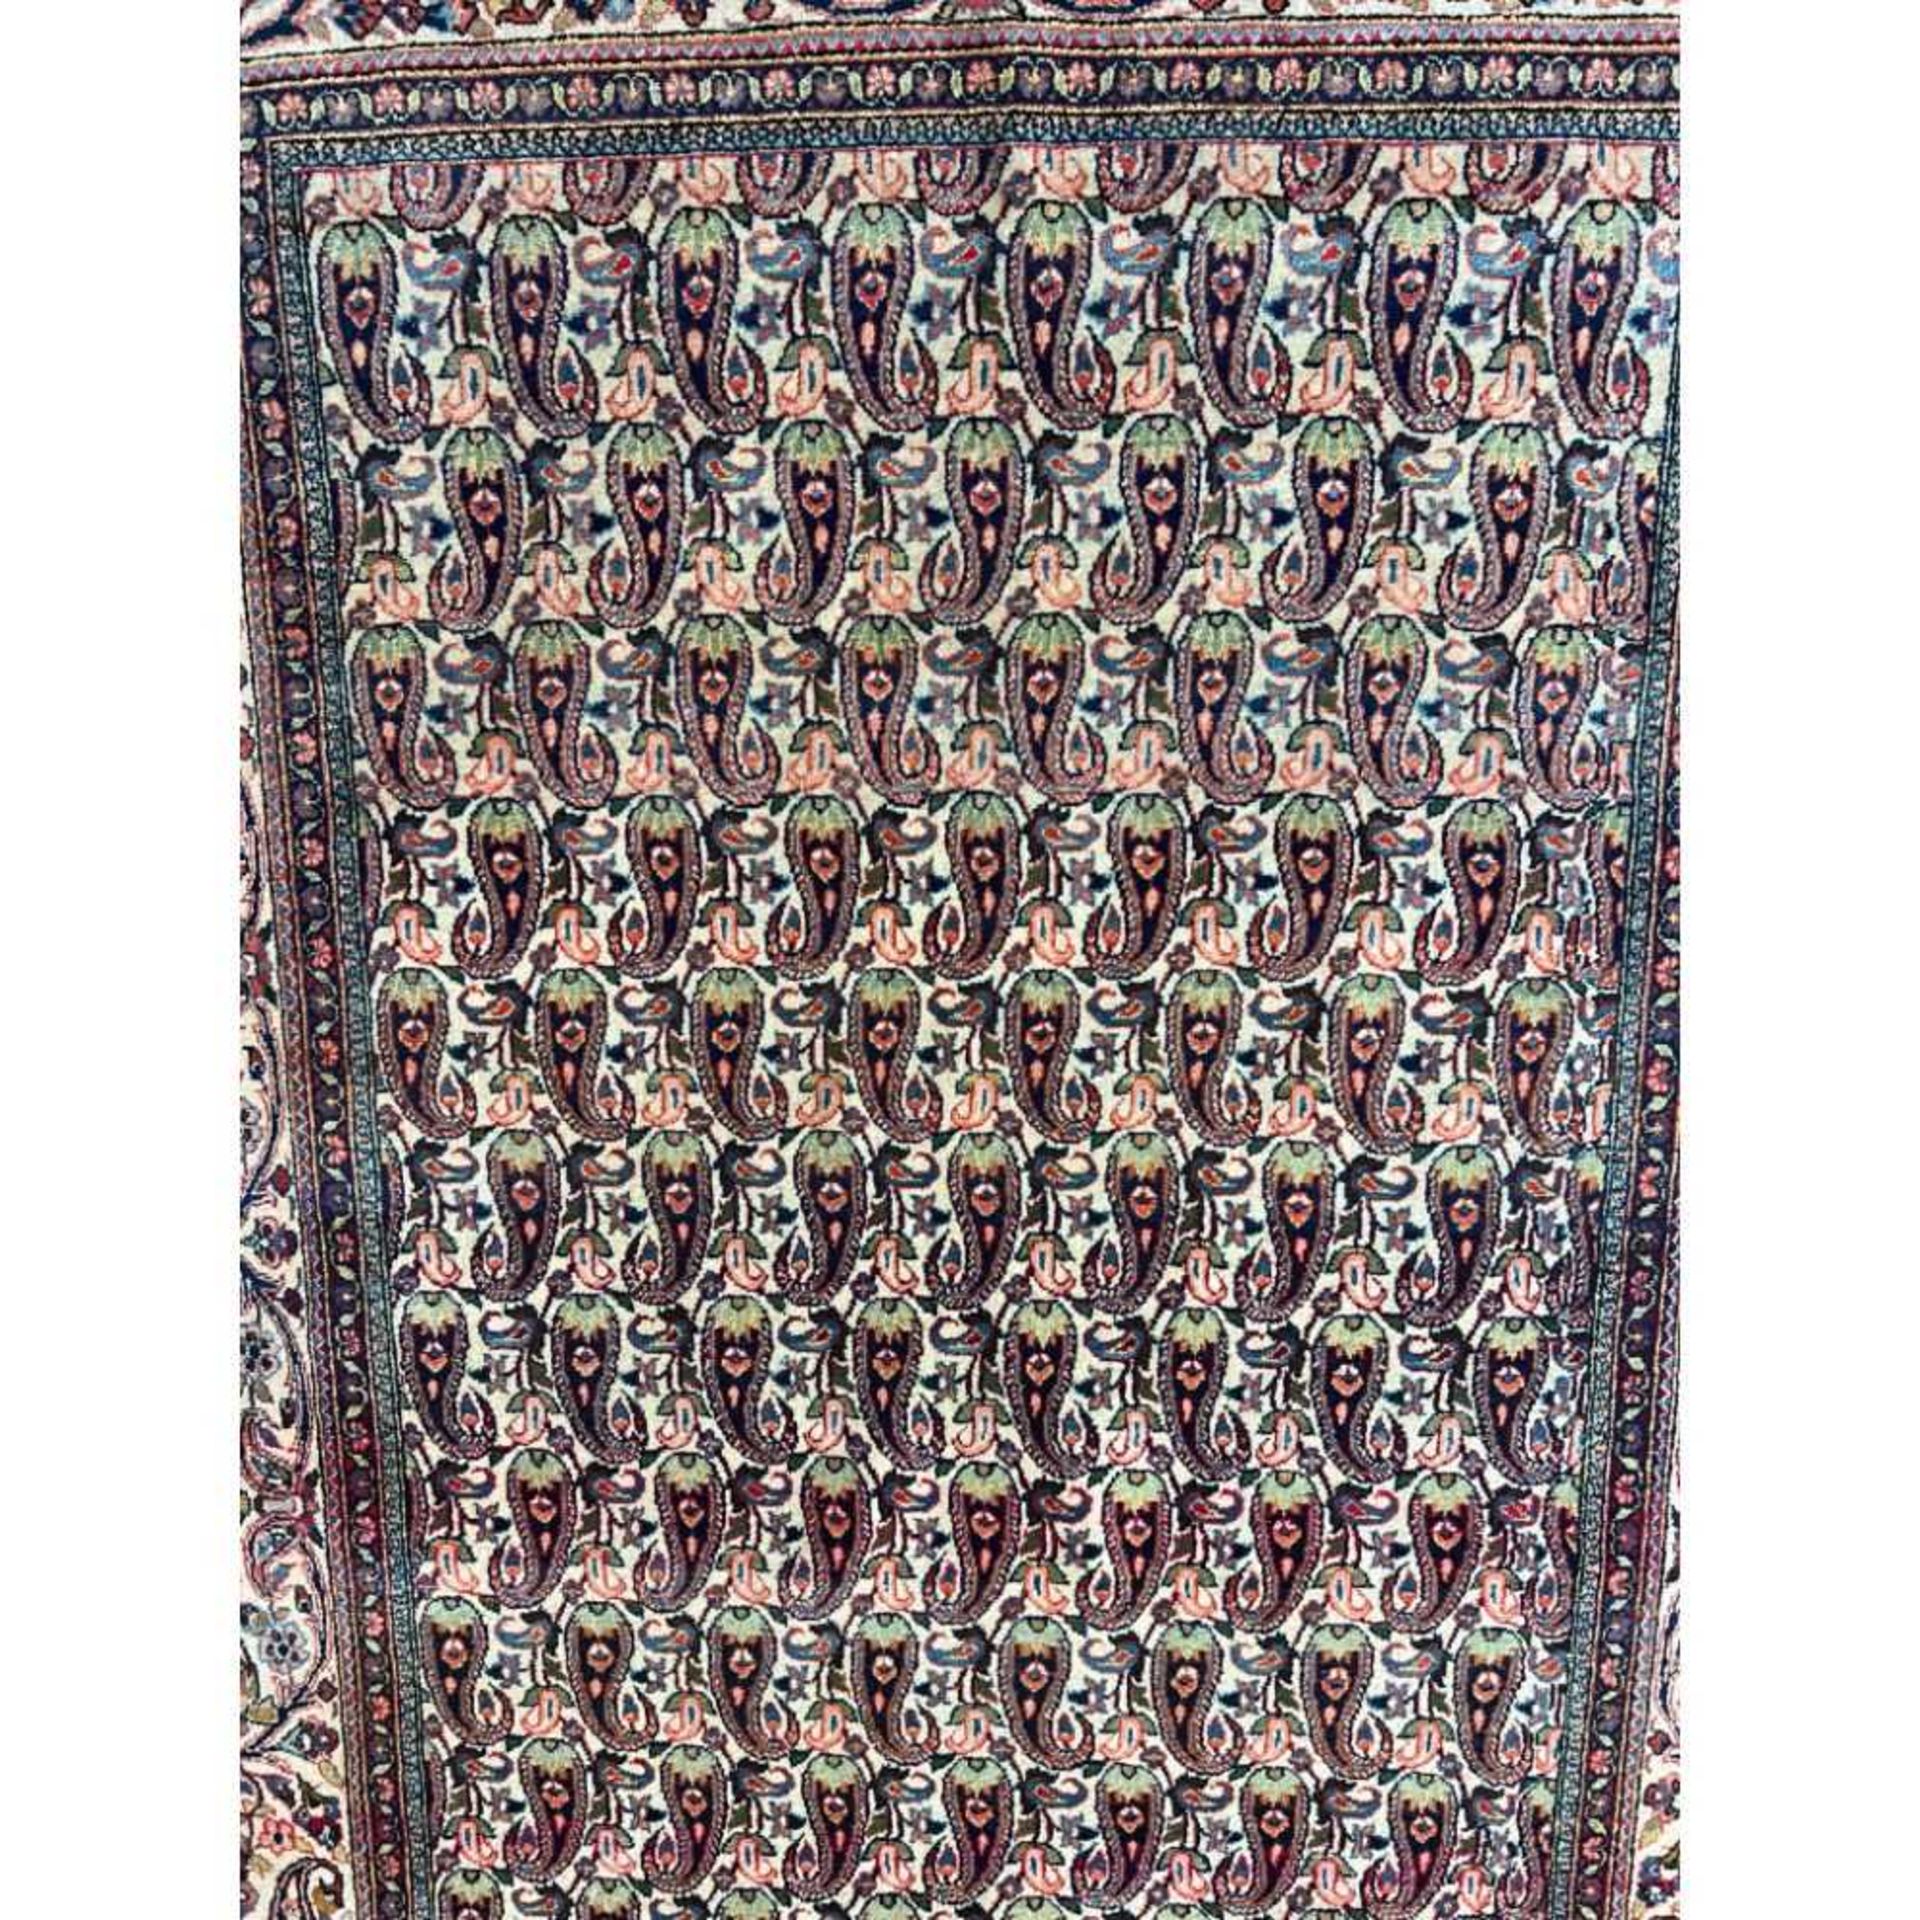 A MID 20TH CENTURY KASHAN CARPET - Image 6 of 6